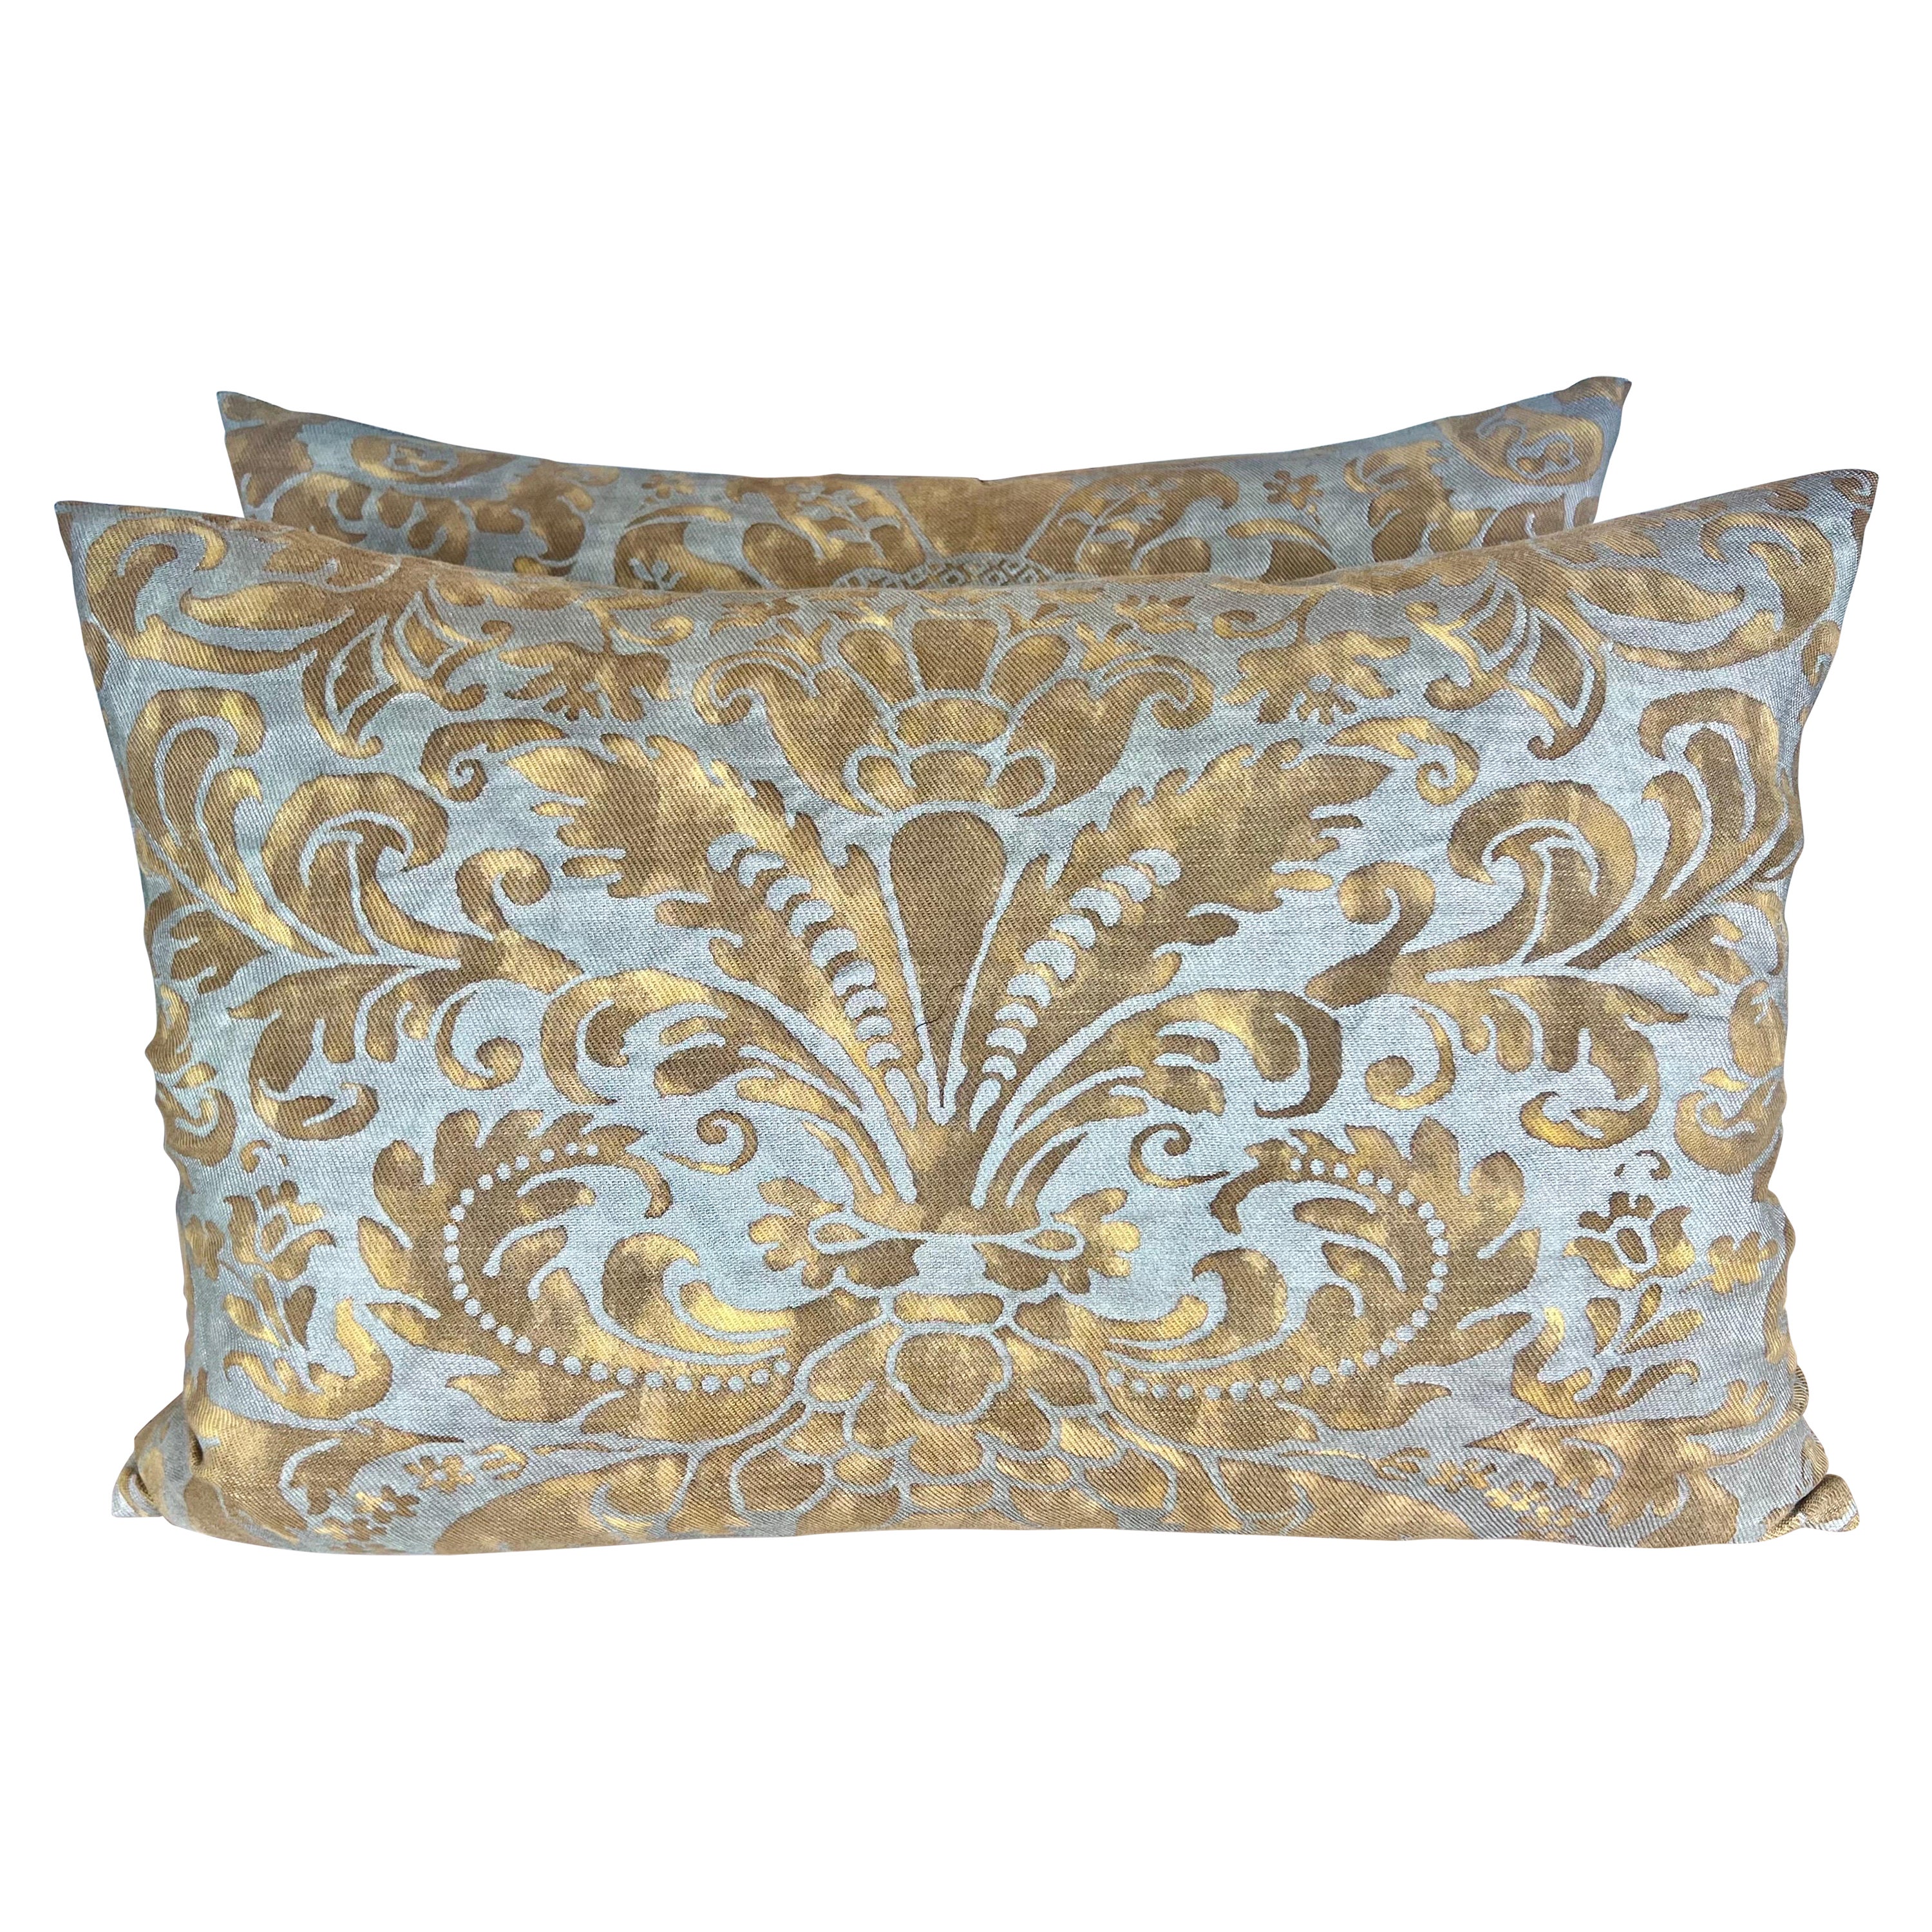 Pair of Golden Caravaggio Fortuny Pillows